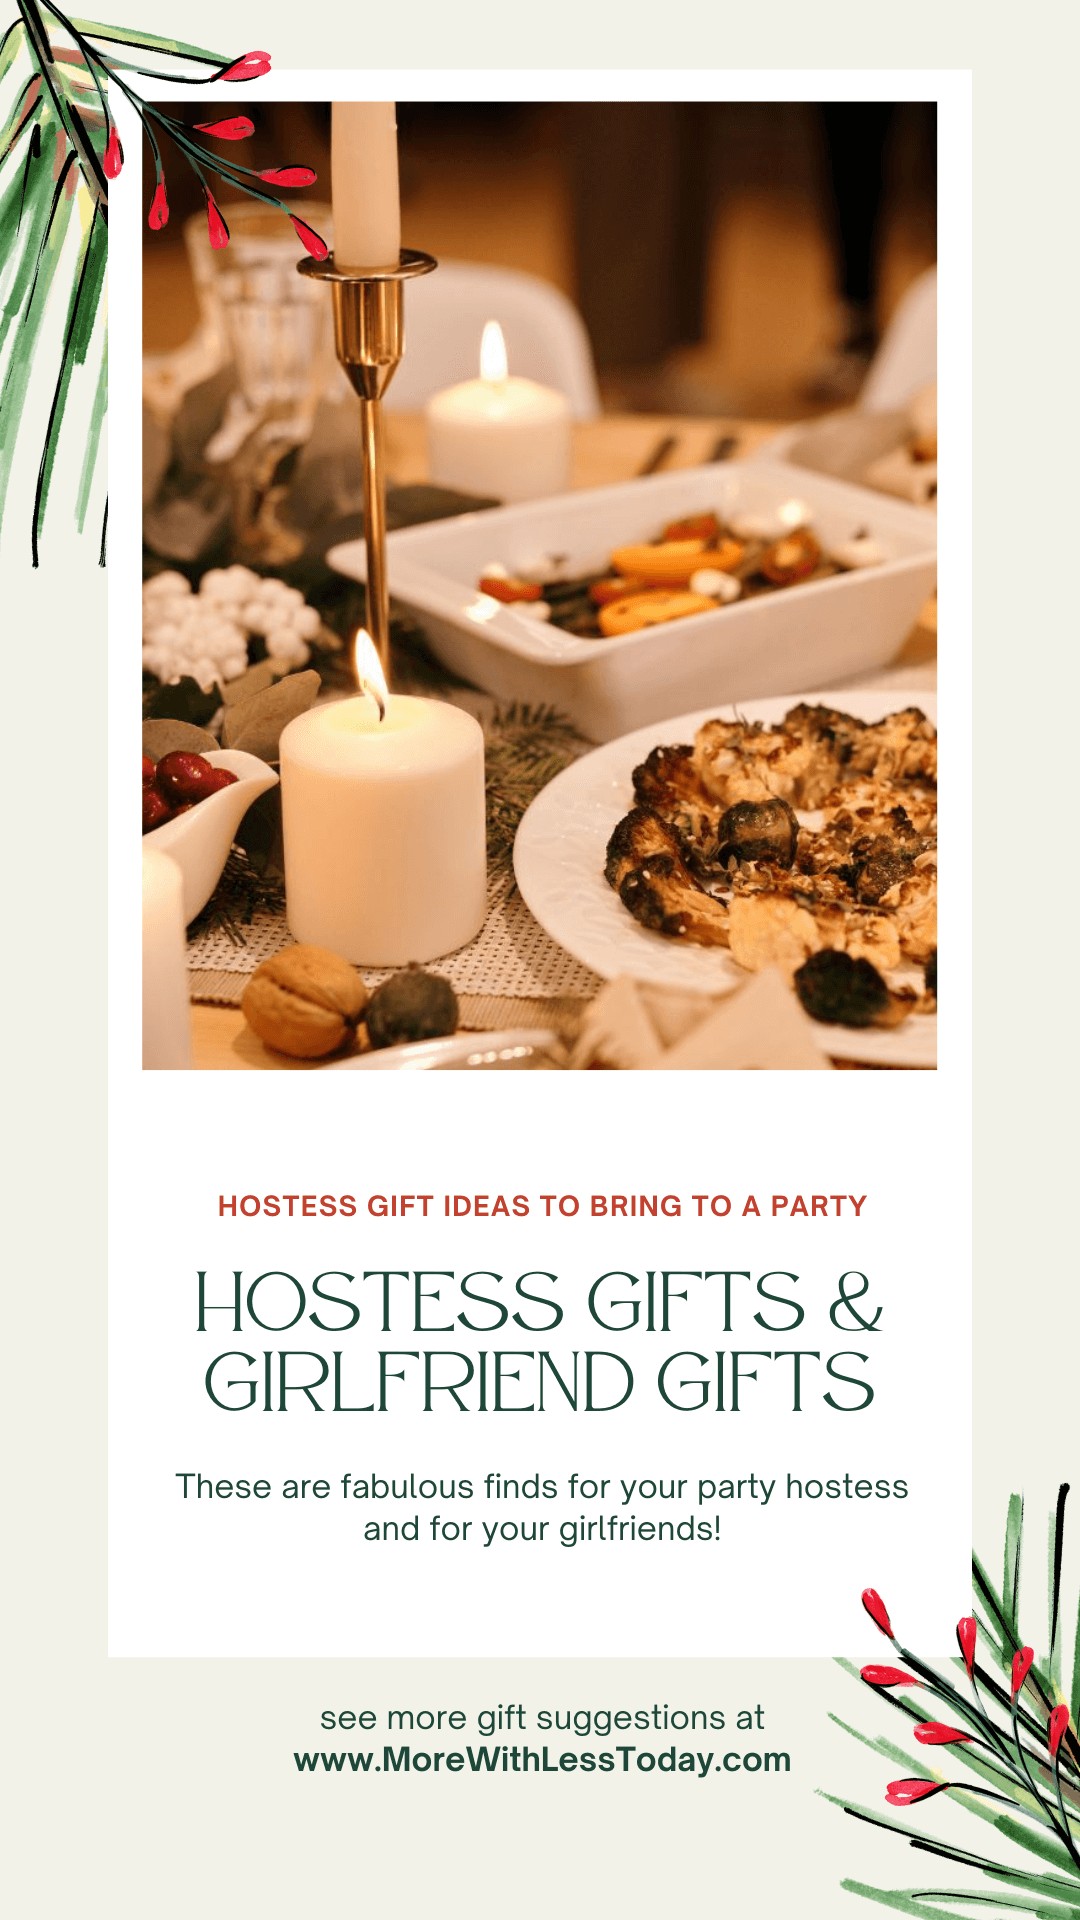 Best Hostess Gift Ideas To Bring To A Party - chic and affordable!